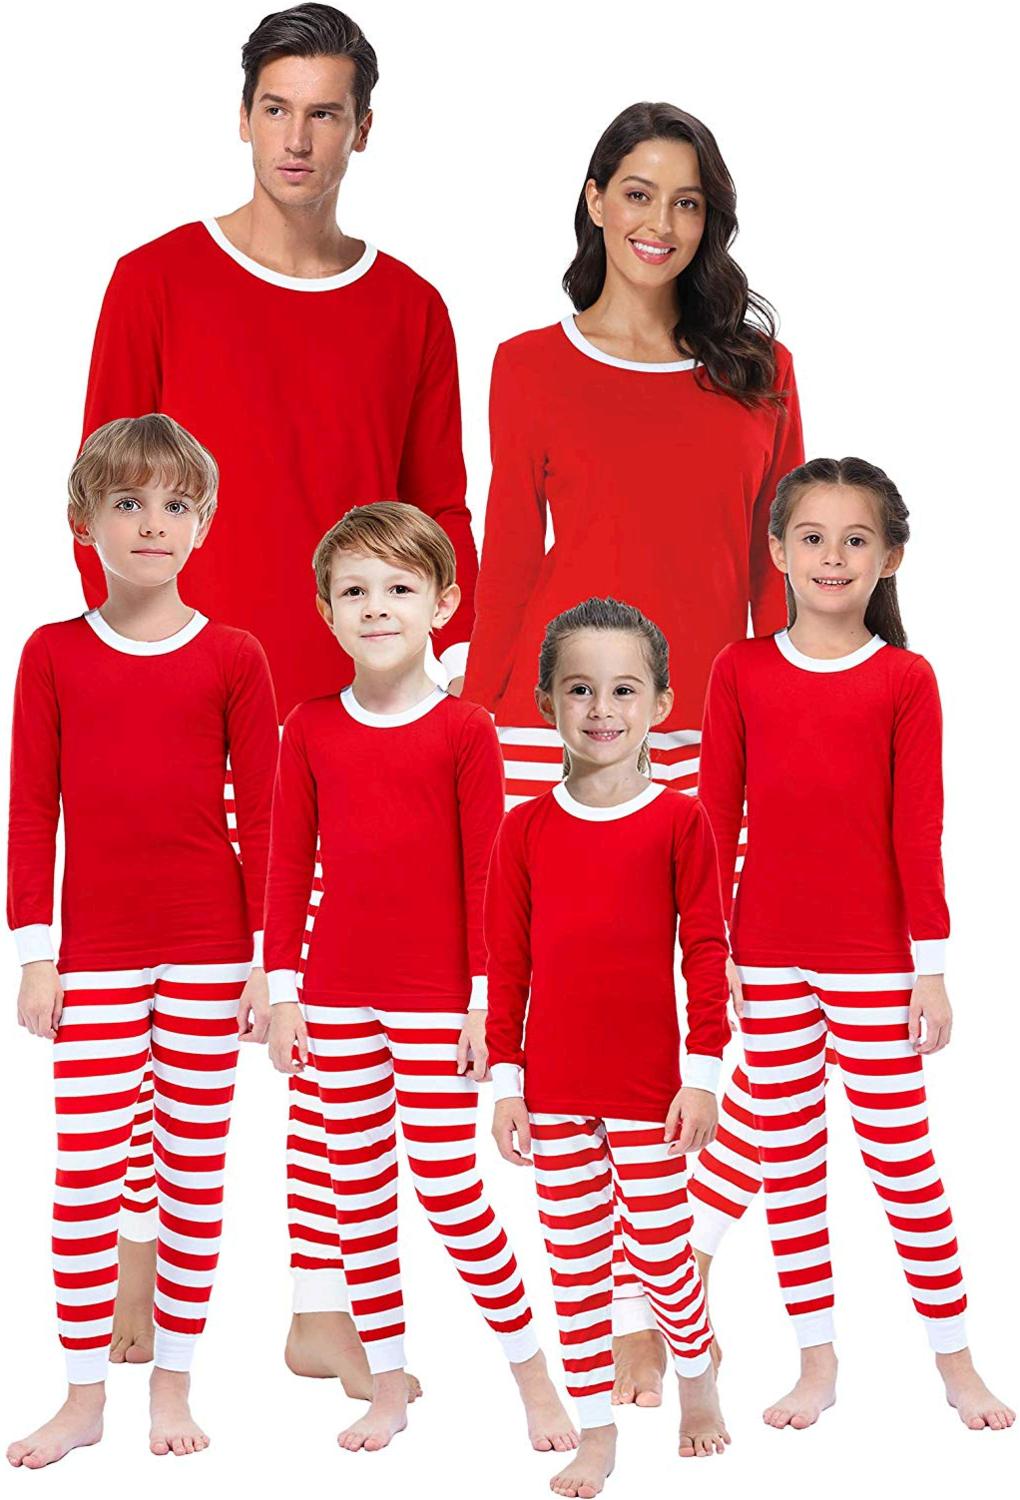 Matching Family Pajamas for Boys, Red-christmas-classic-striped, Size Men-Large | eBay